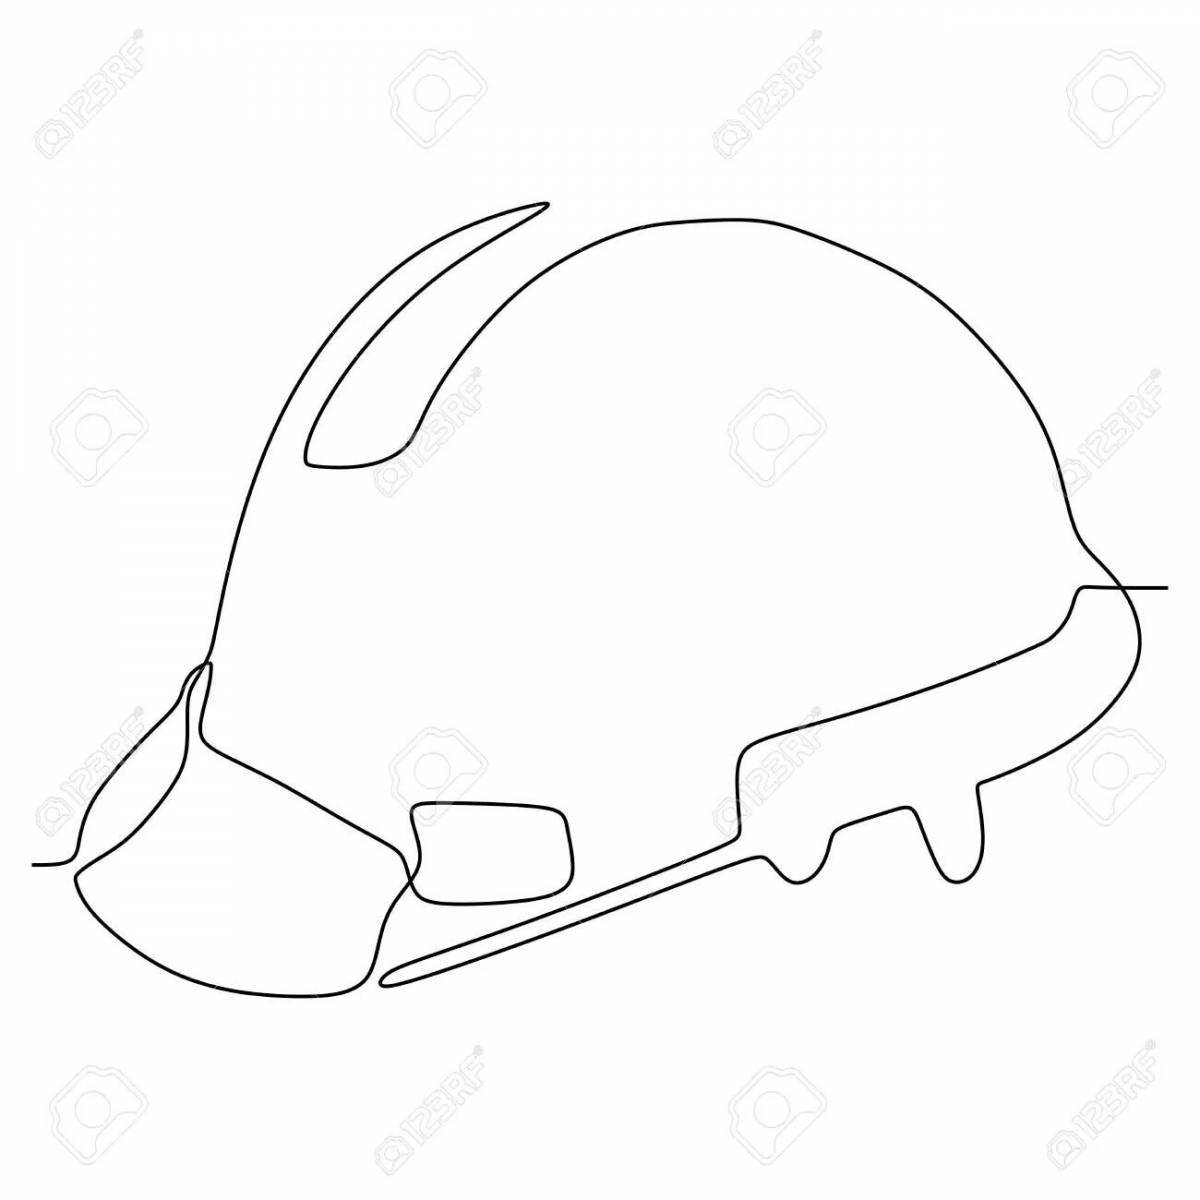 Great soldier helmet coloring page